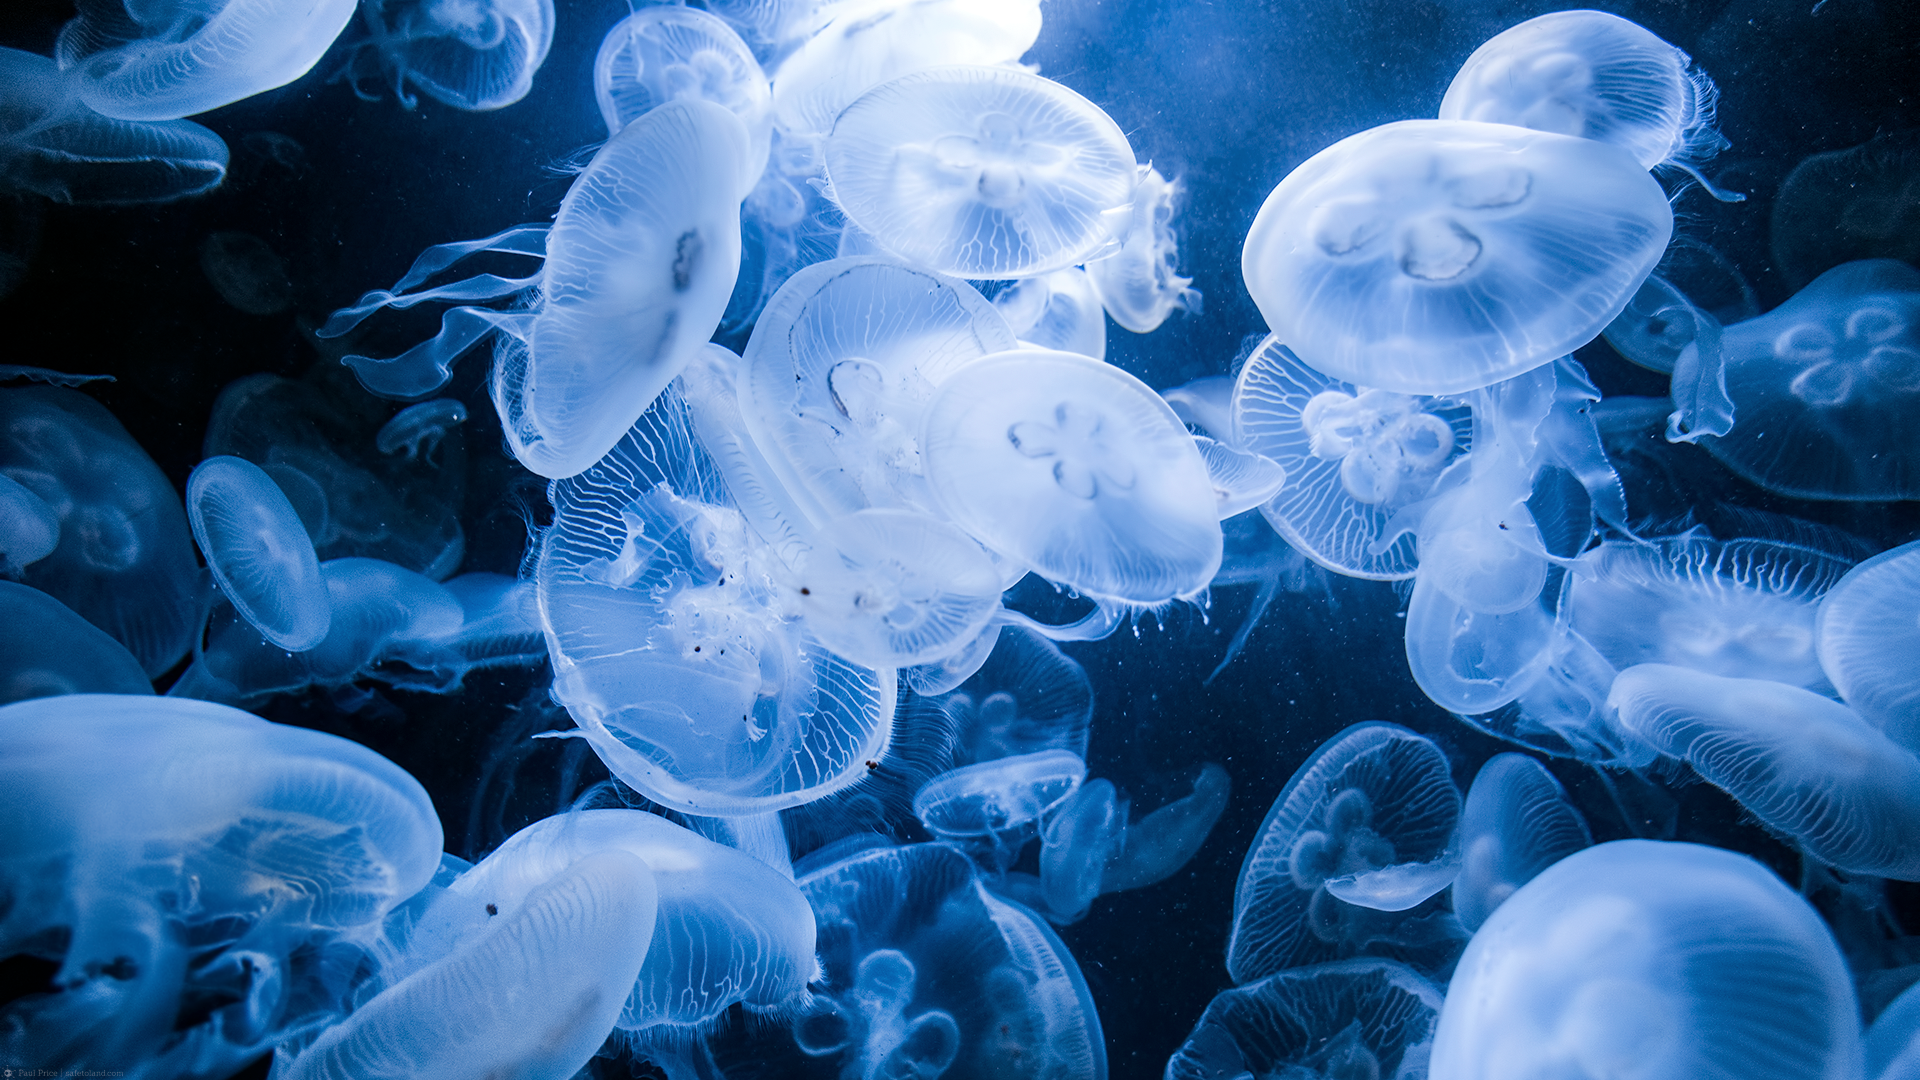 4K Jellyfish Wallpaper HD:Amazon.co.uk:Appstore for Android